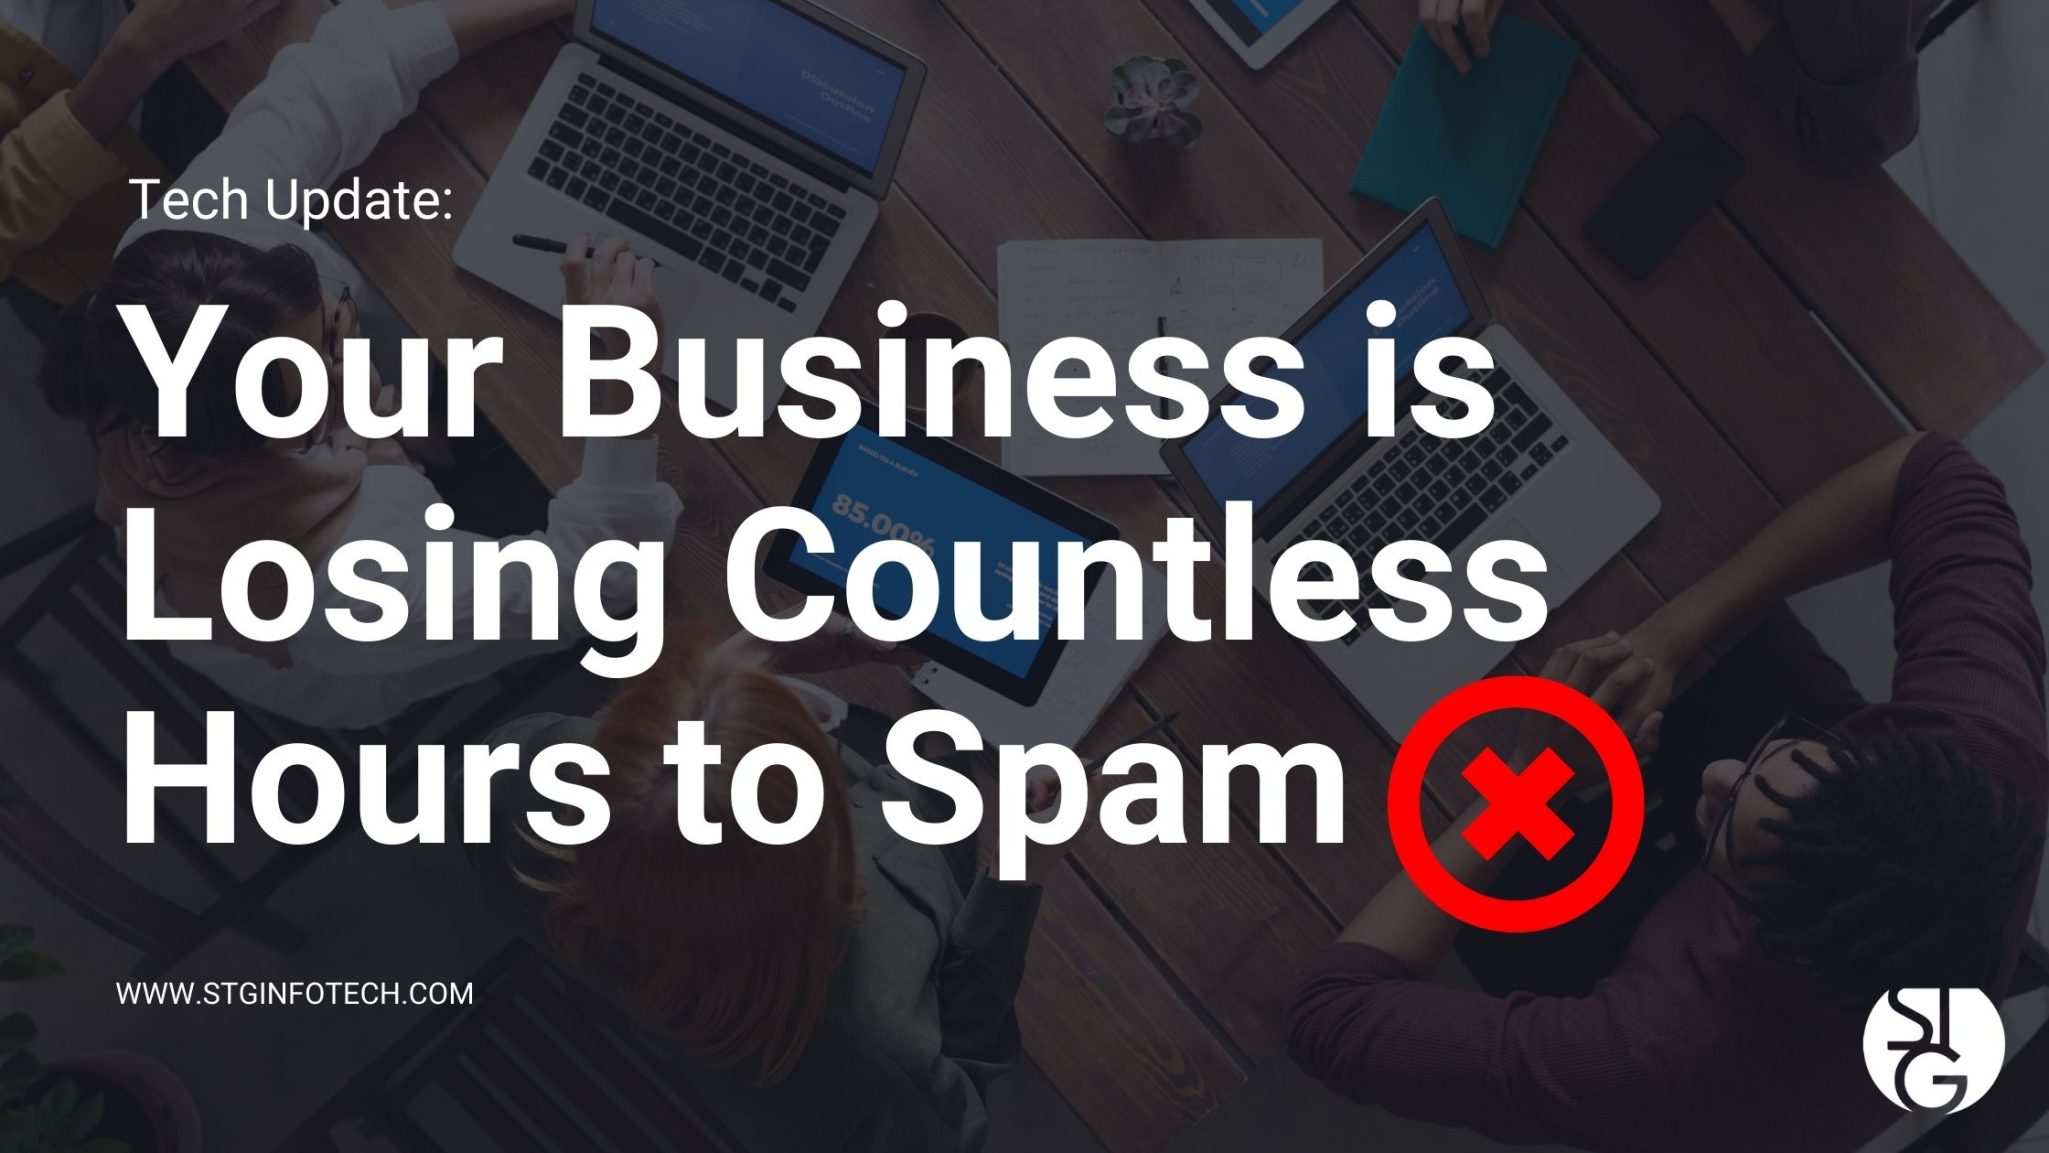 Your Business is Losing Countless Hours to Spam